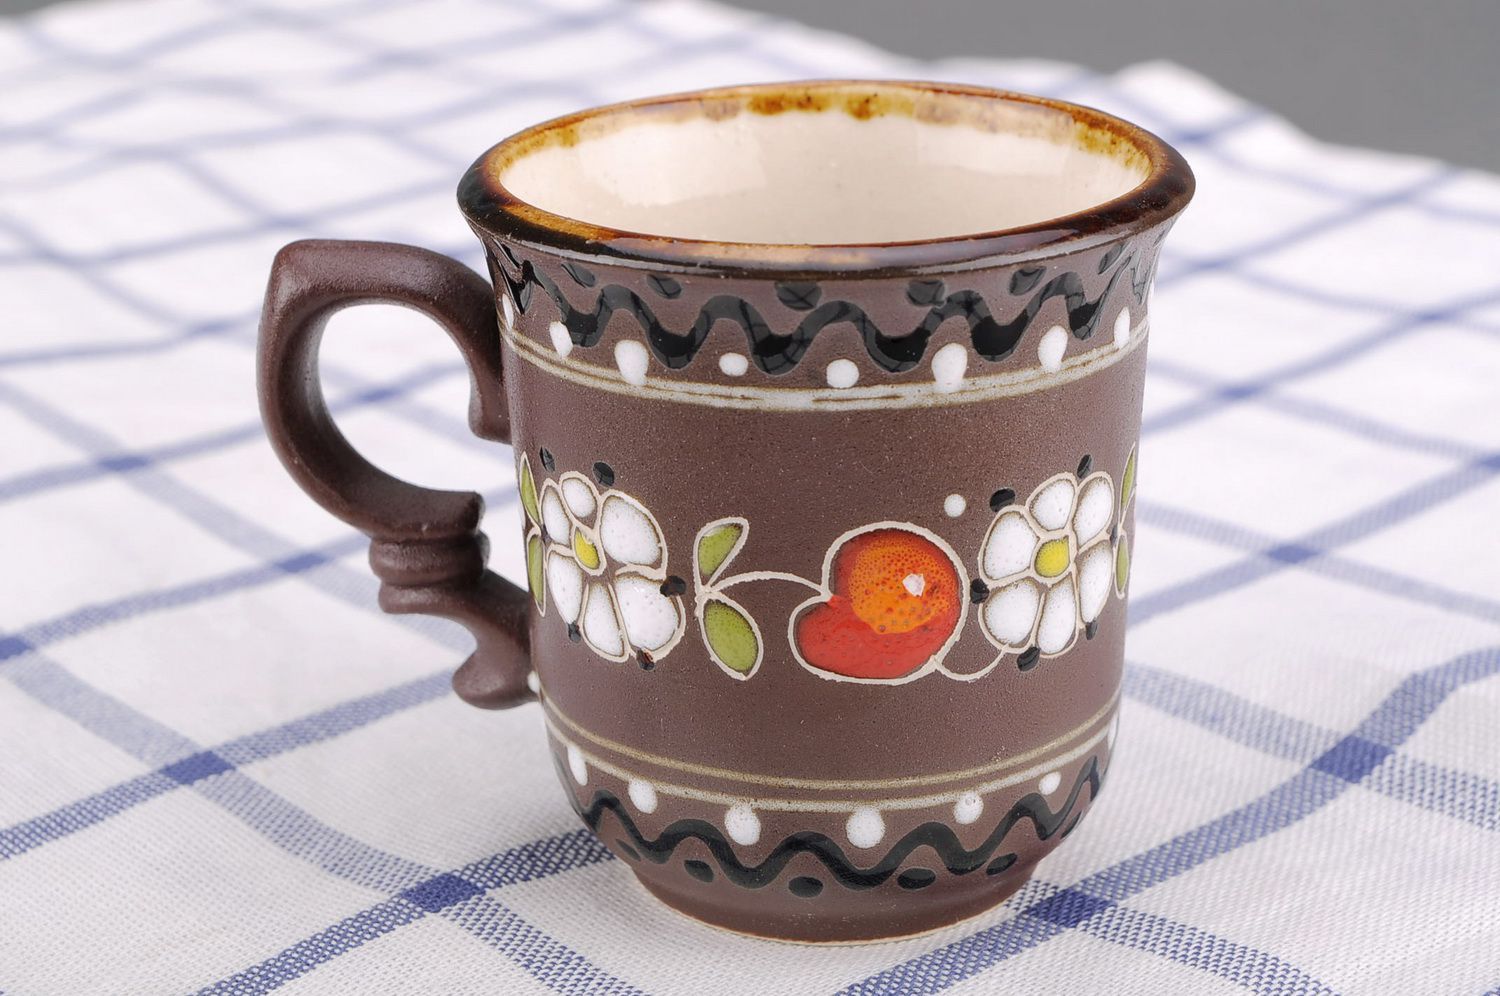 Clay lead-free glazed hand-painted teacup in brown, white, and red color with handle photo 1